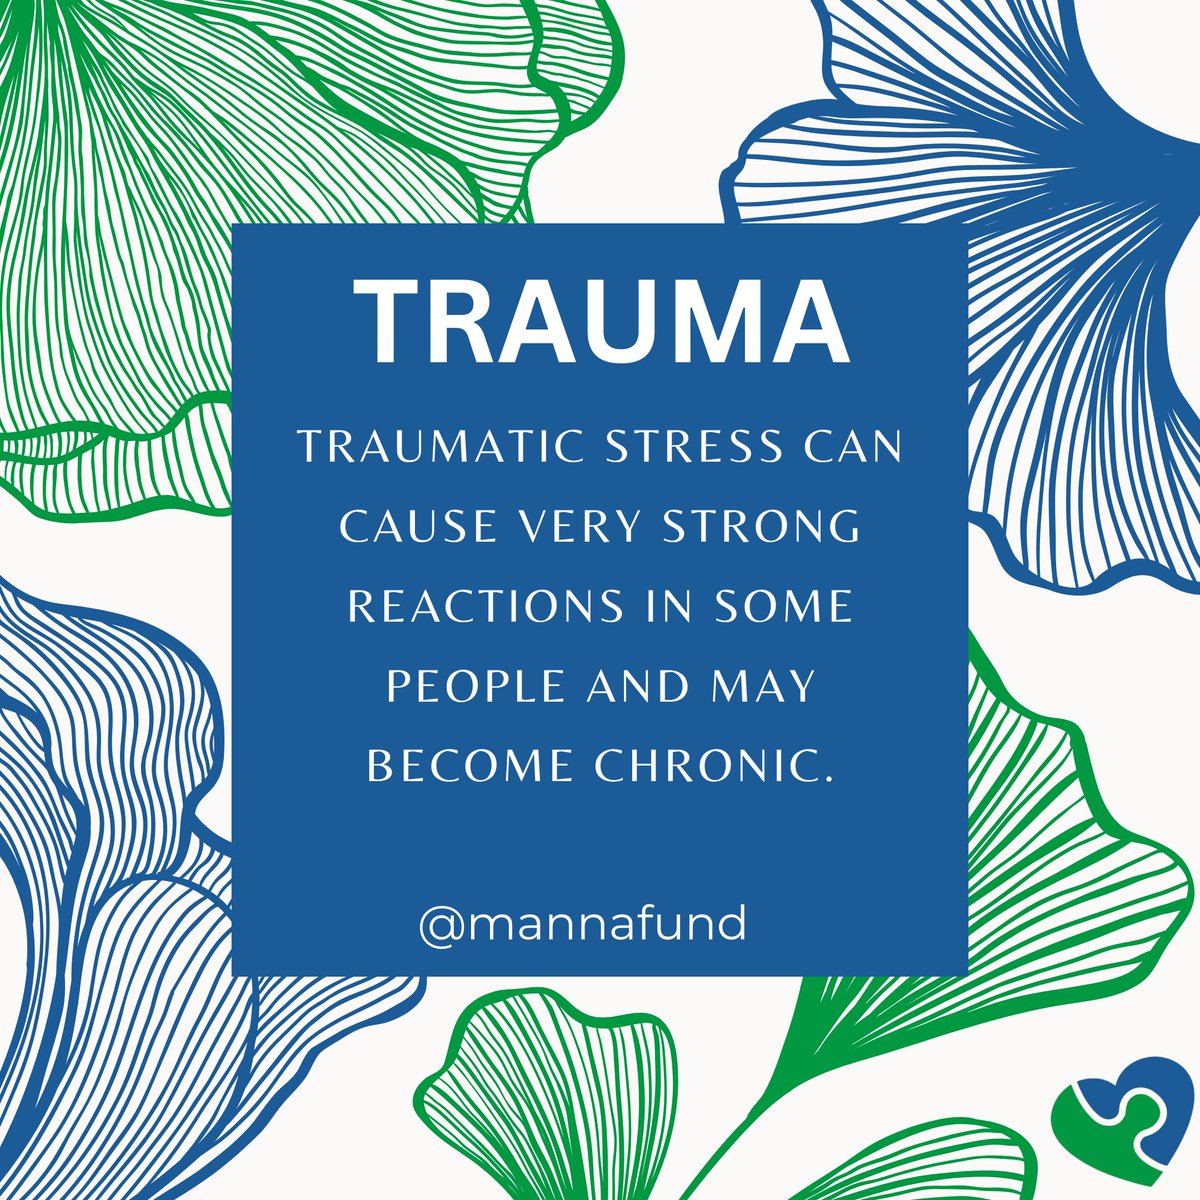 🔹 Understanding Trauma 🔹
Traumatic stress isn’t something that fades overnight. For many, it lingers, leaving behind strong reactions that can become chronic if left unaddressed.

mannafund.org 

#TraumaAwareness #SupportAndHealing